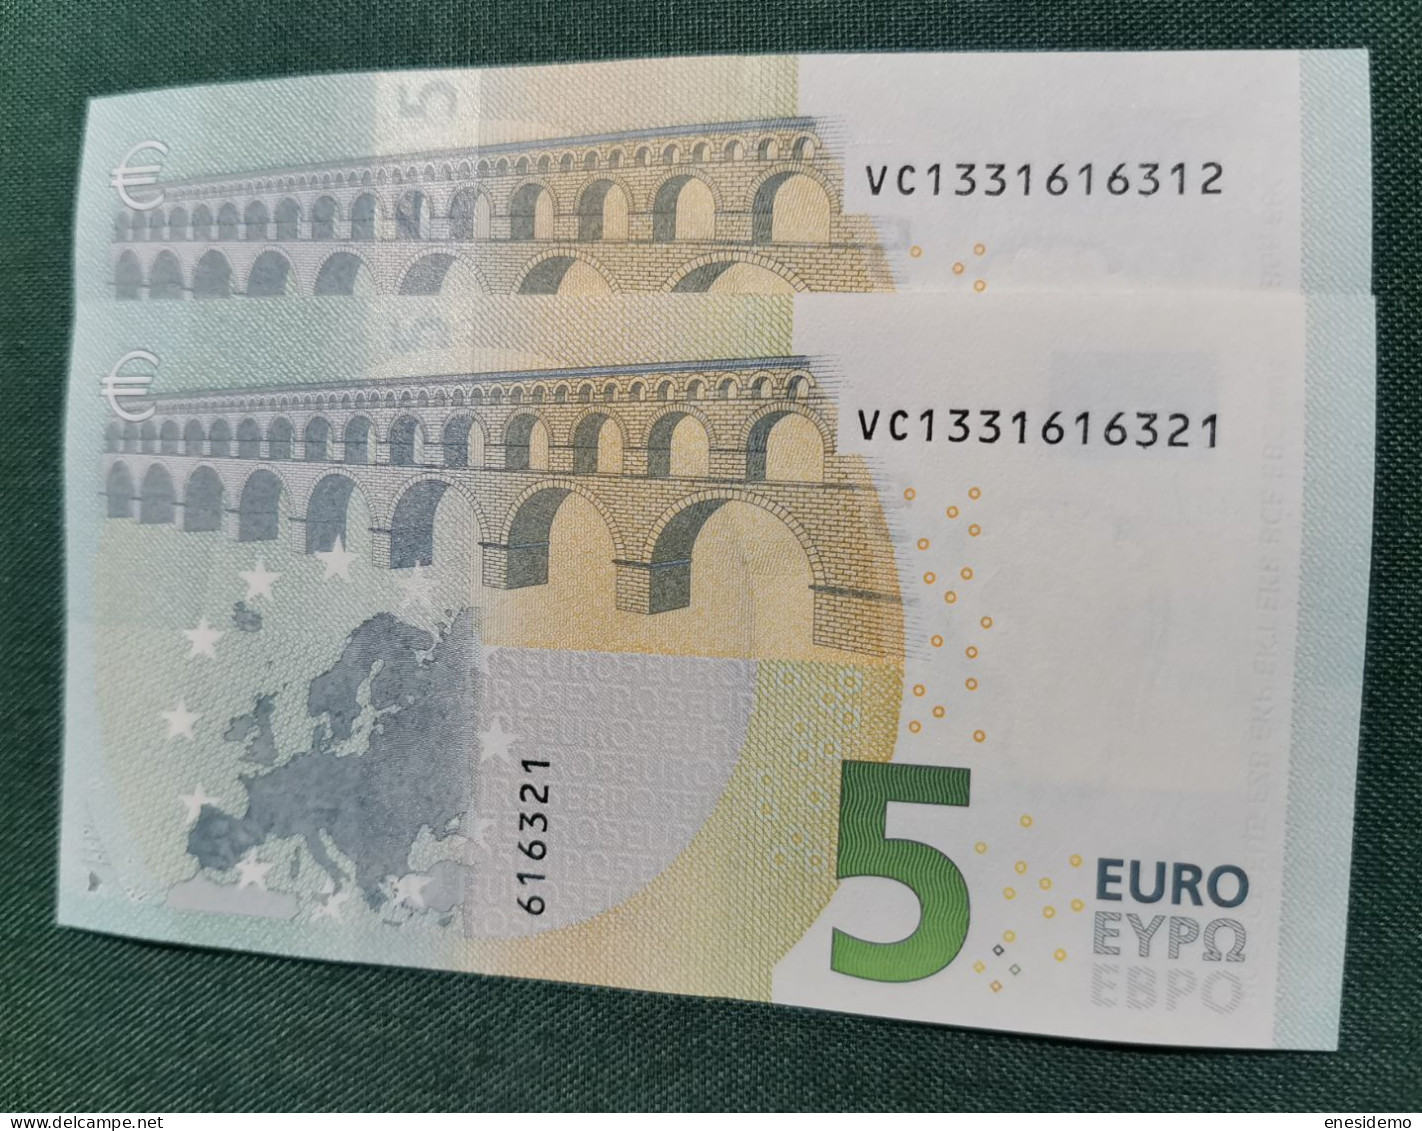 5 EURO SPAIN 2013 LAGARDE V014F5 VC SC FDS CORRELATIVE COUPLE RADAR 2 ONLY FOUR NUMBERS UNCIRCULATED PERFECT - 5 Euro